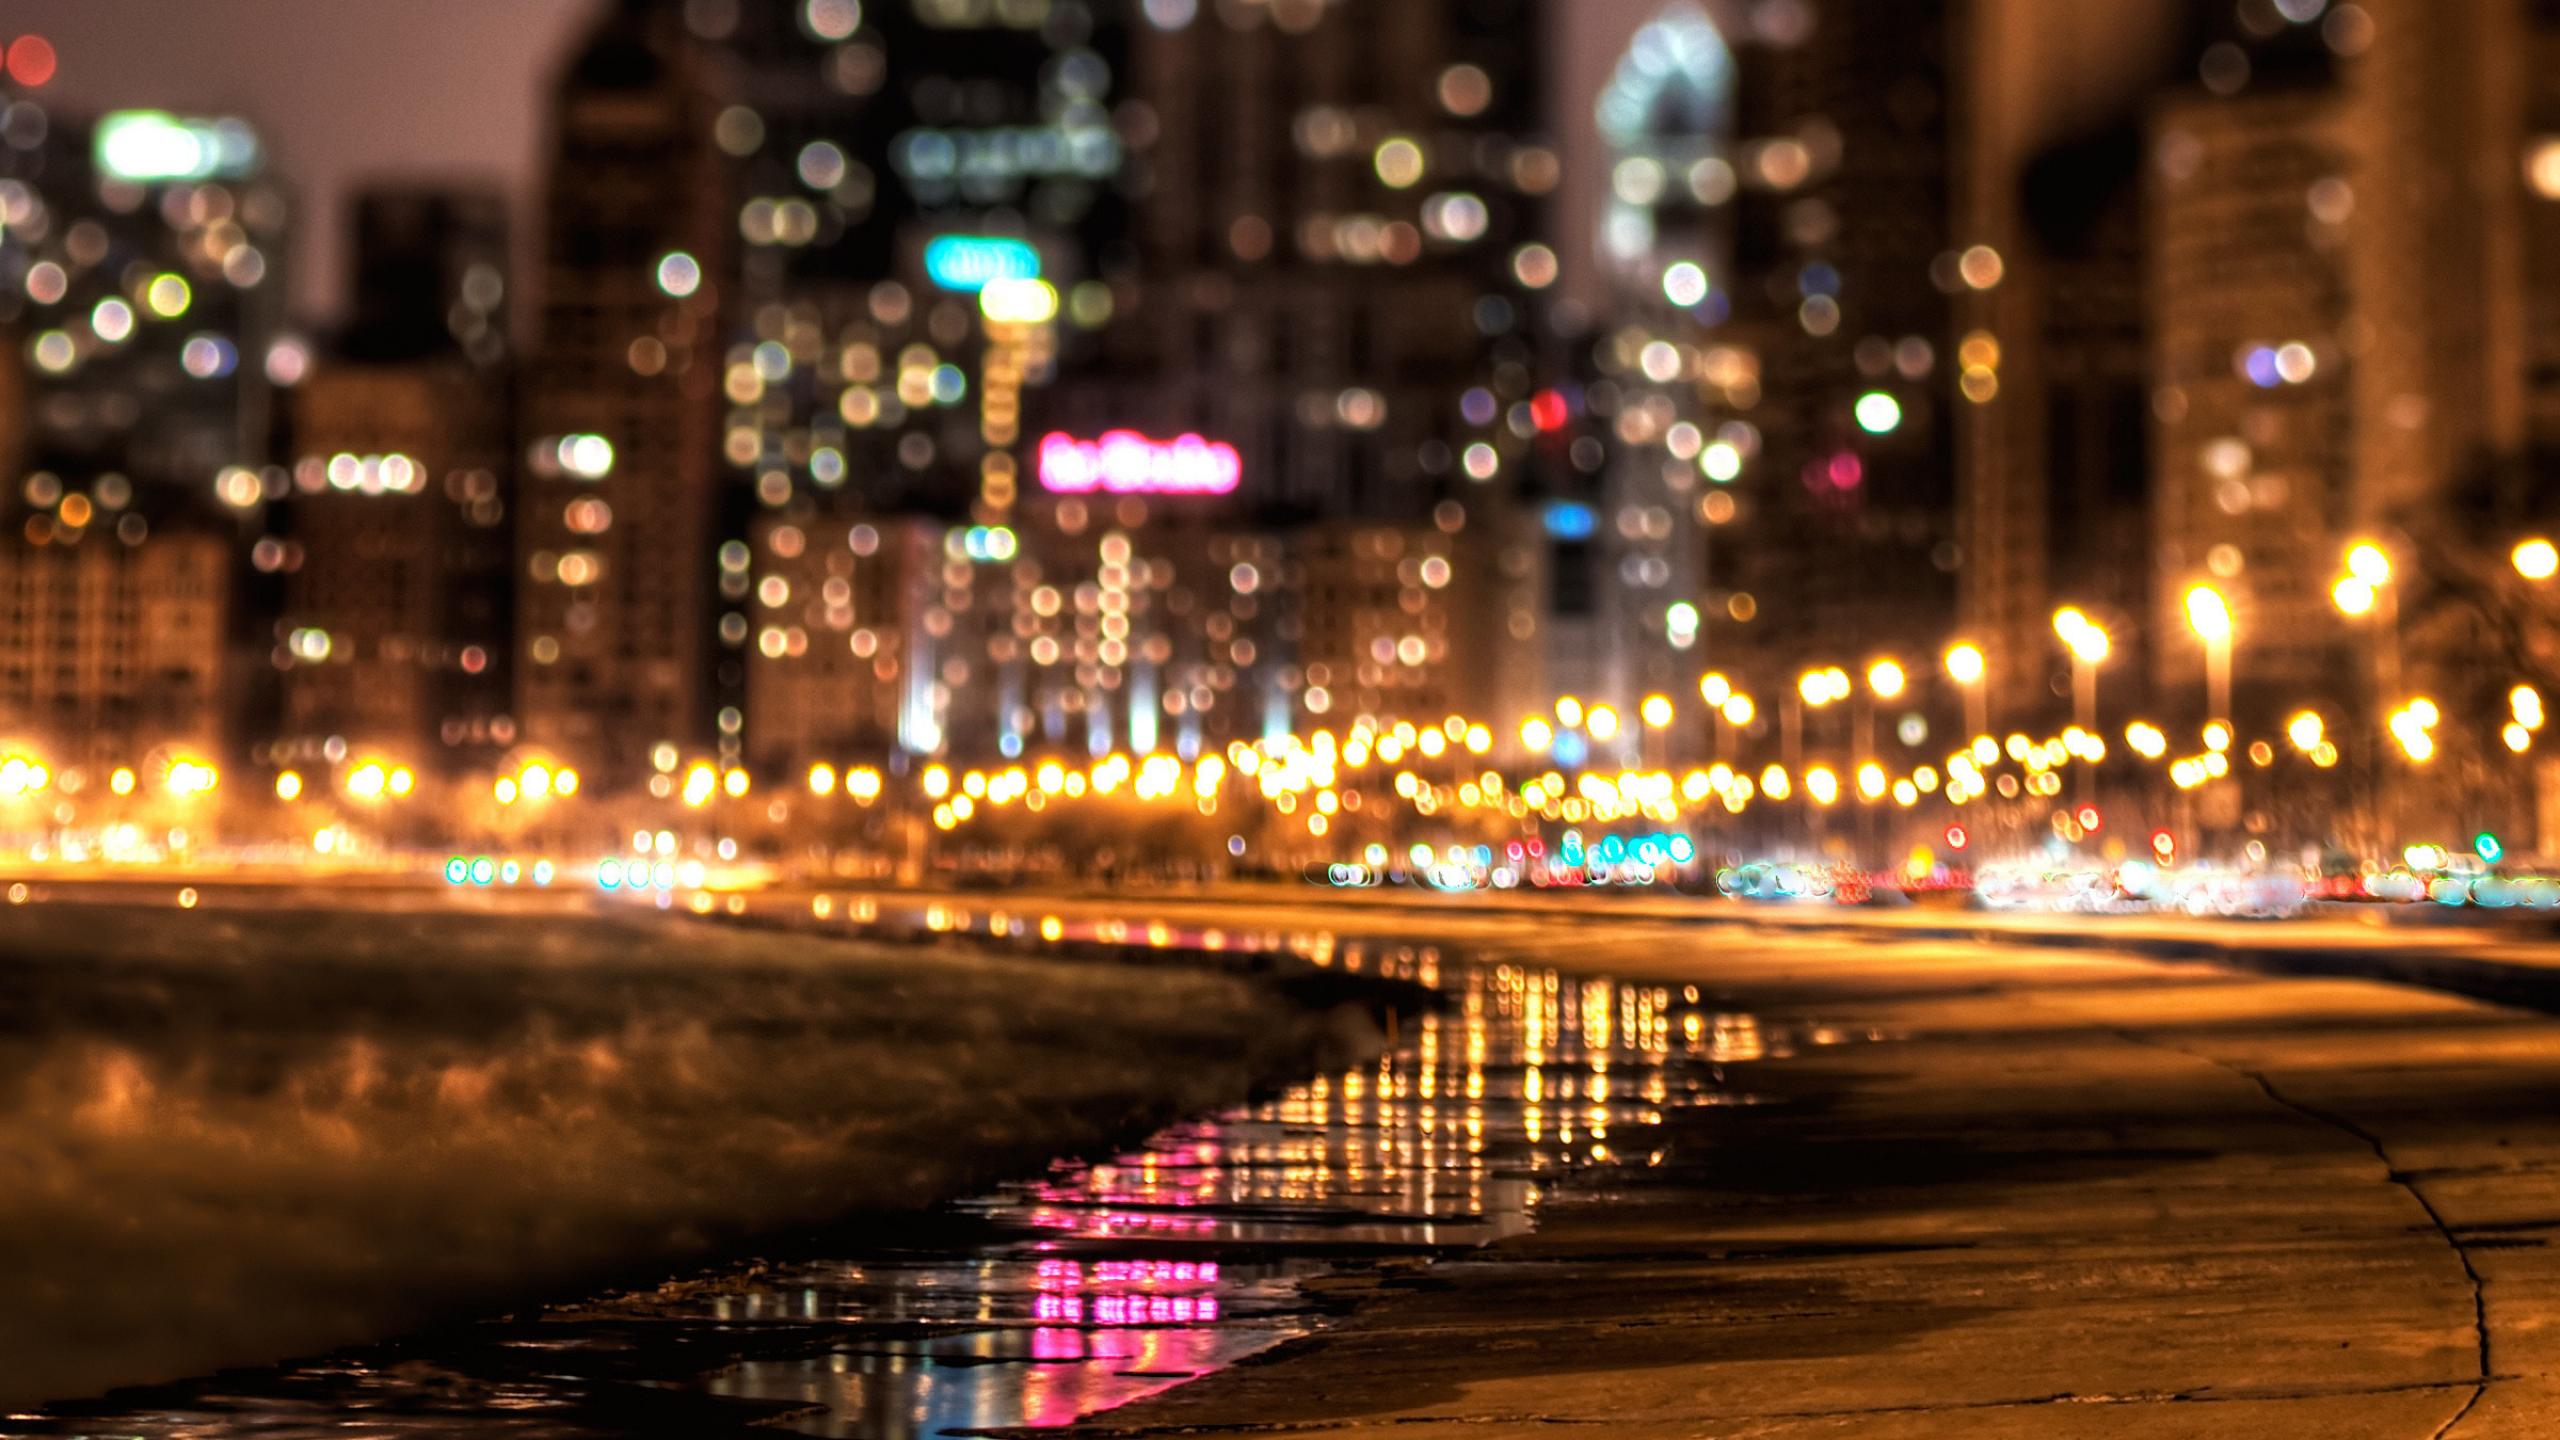 General 2560x1440 cityscape lights city night bokeh reflection building water street light blurred blurry background city lights